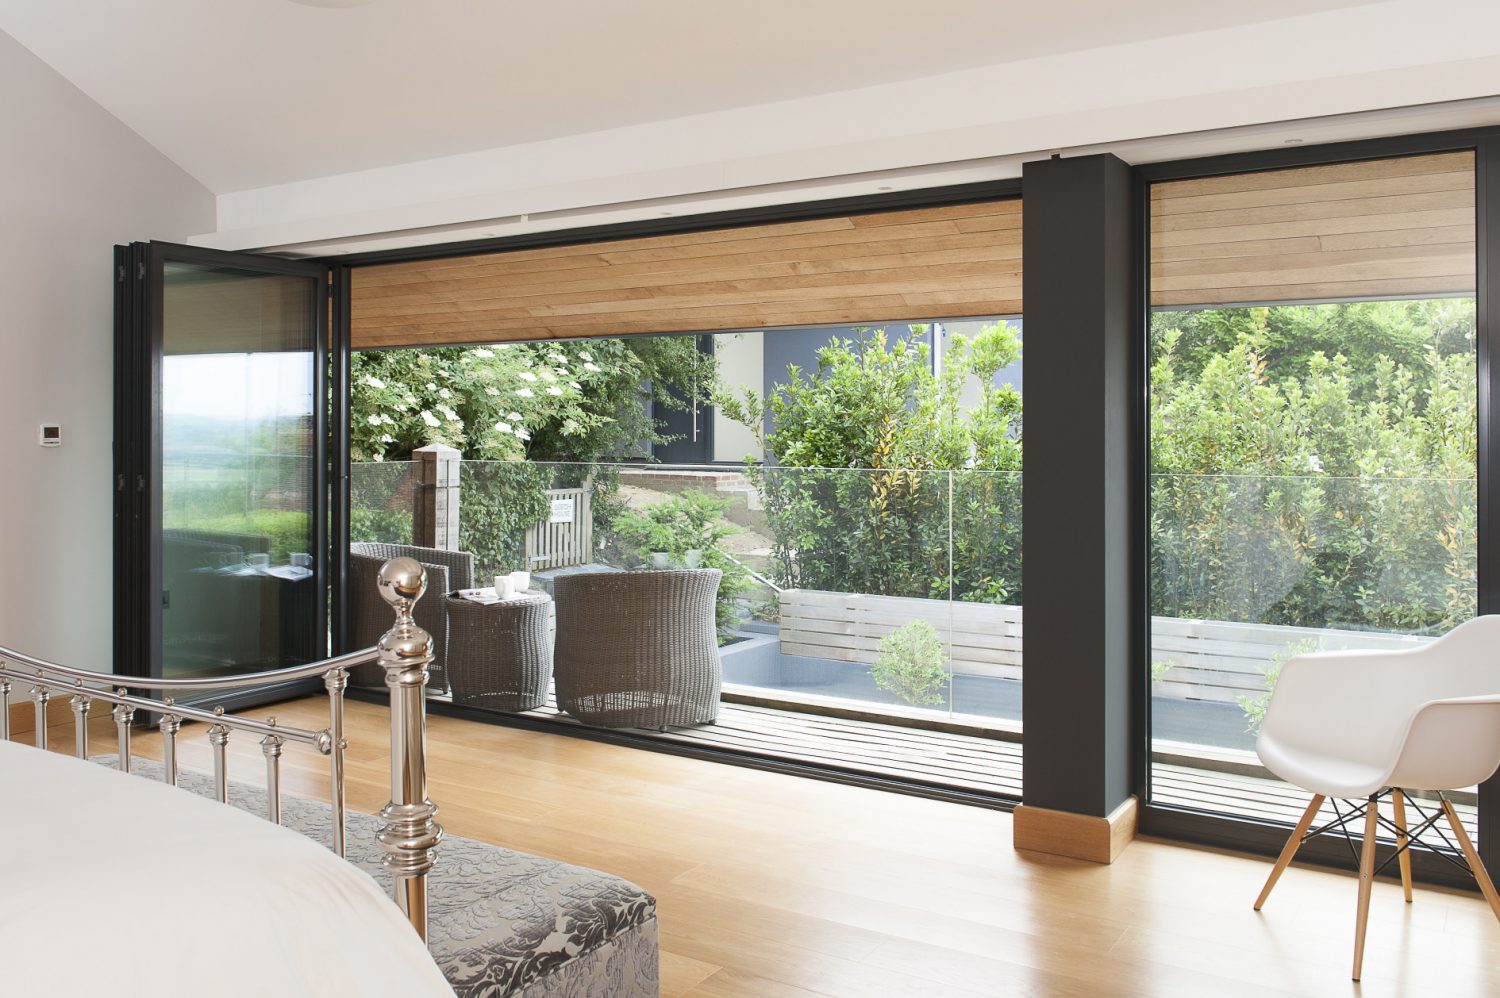 The wall of bi-folding doors is echoed upstairs in the master bedroom directly above the kitchen where they open out onto a decked balcony and more Lloyd Loom surrounded by a plate glass balustrade